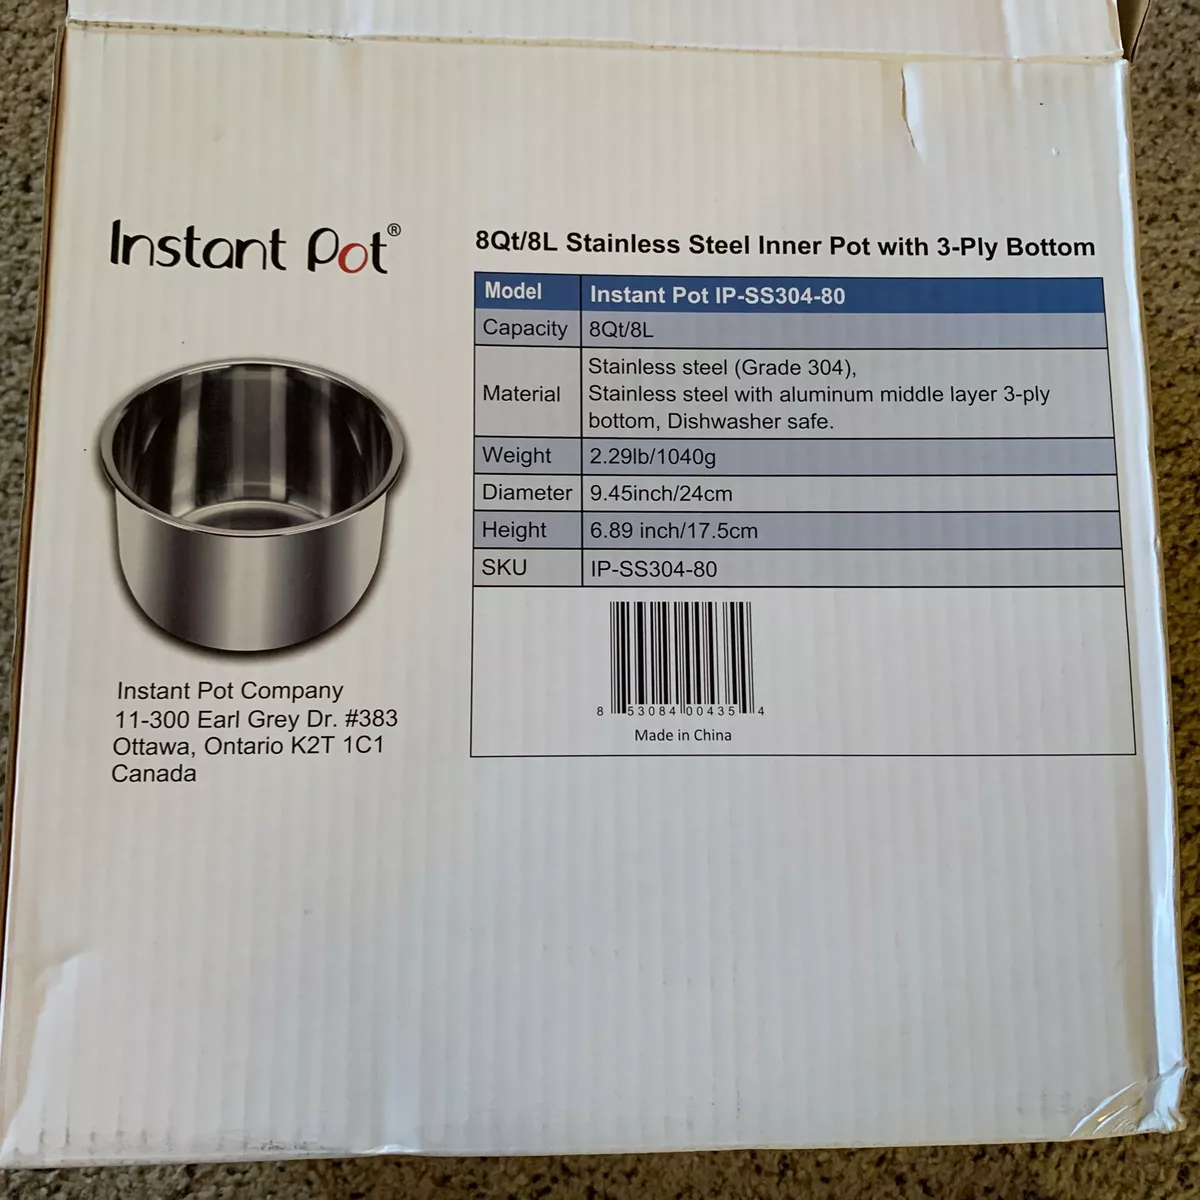 Instant Pot Stainless Steel Inner Cooking Pot 8Qt/8L-3Ply Bottom-Mixing Bowl  New